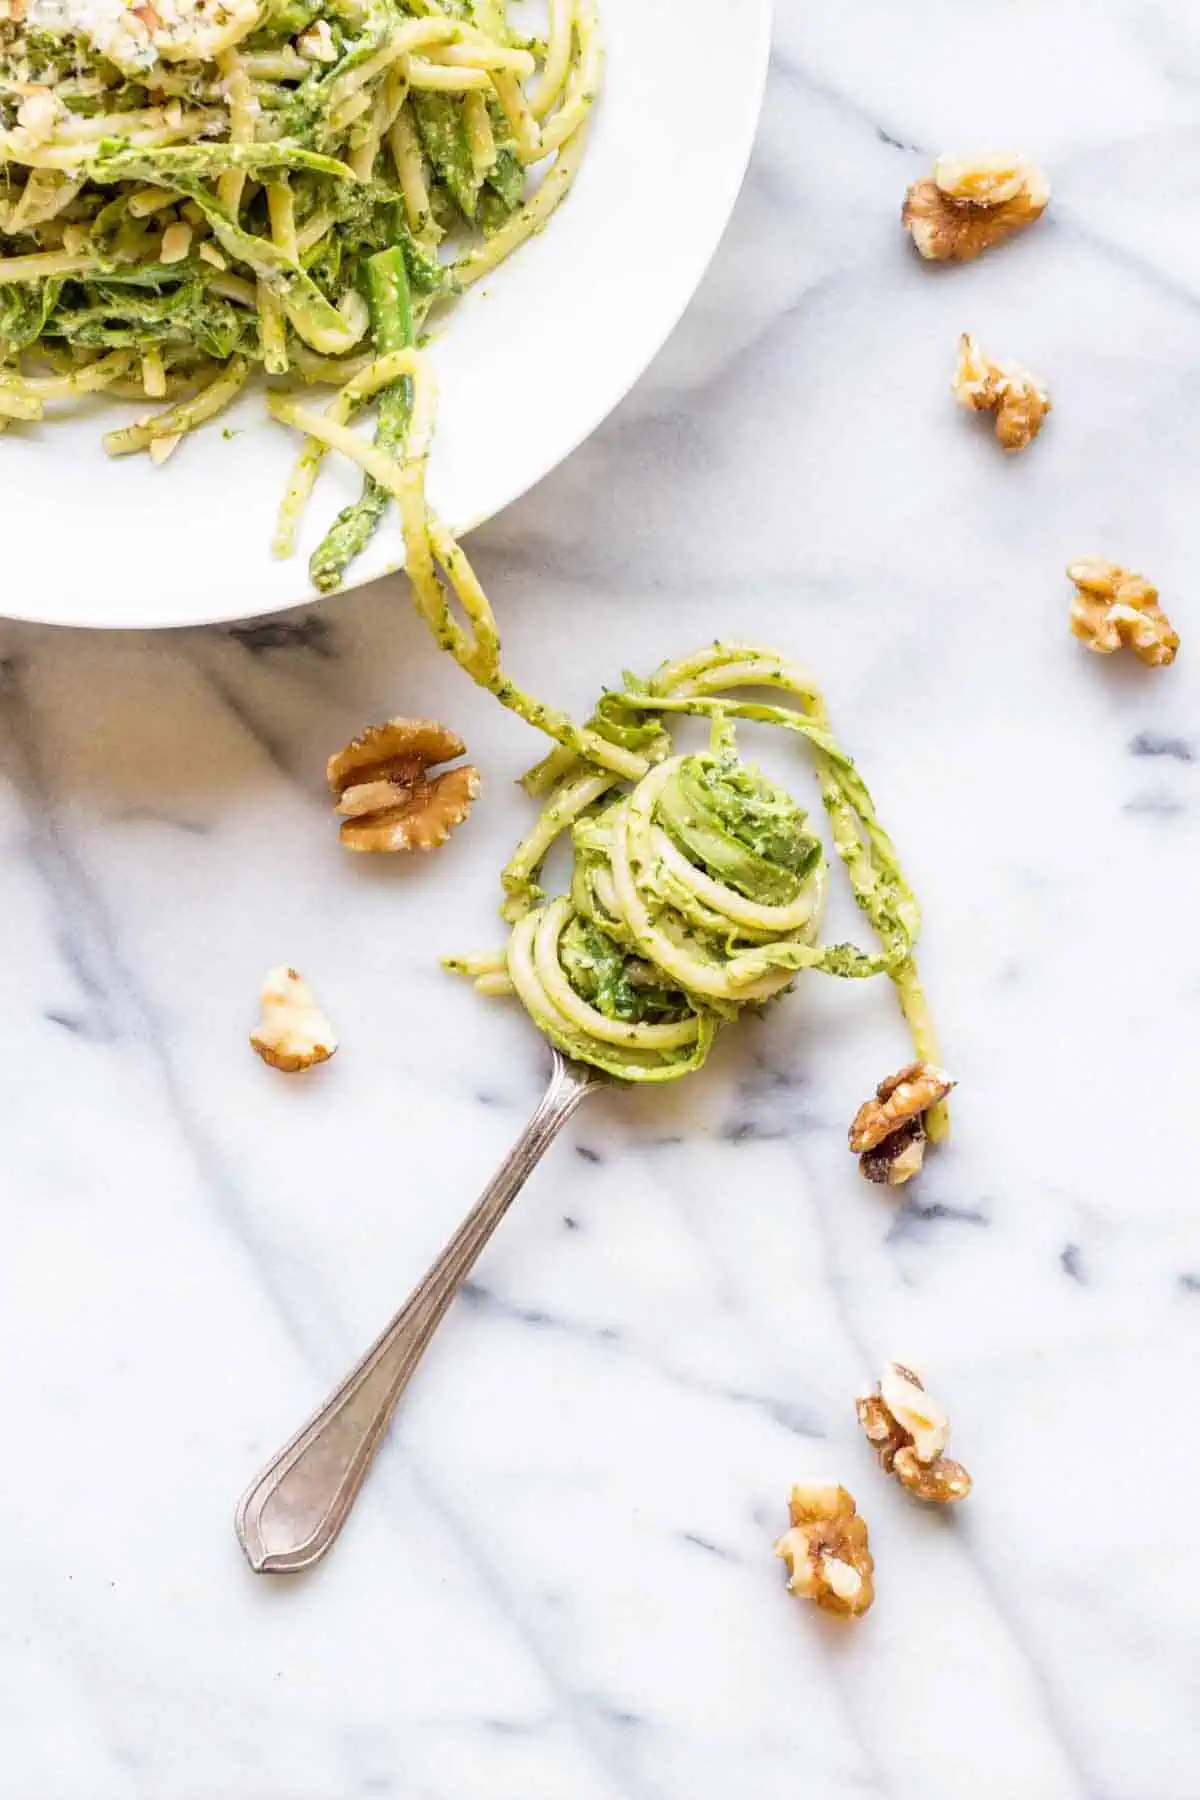 A bowl of green pesto pasta and a fork with pasta twirled around it.